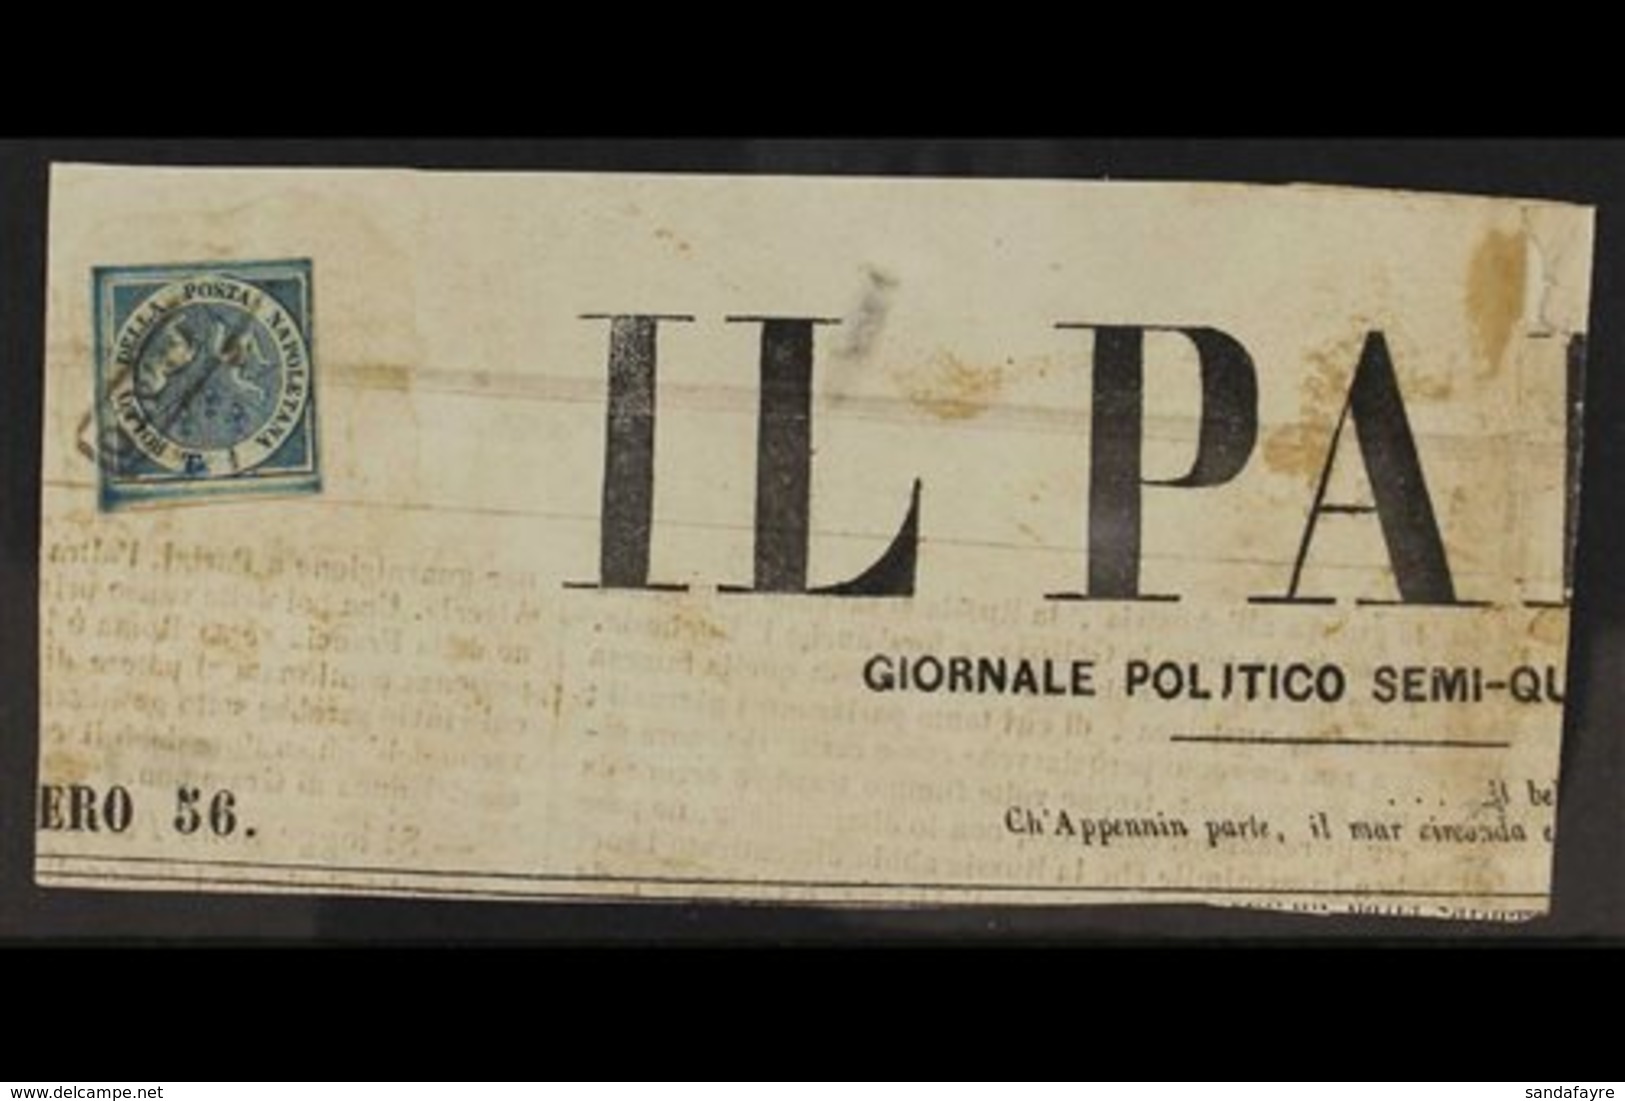 NAPLES 1860 ½t Deep Blue "Trinacria", Sass 15,  Tied To 17th Nov 1860 Header From "Il Paese" Newspaper. Clear To Large M - Unclassified